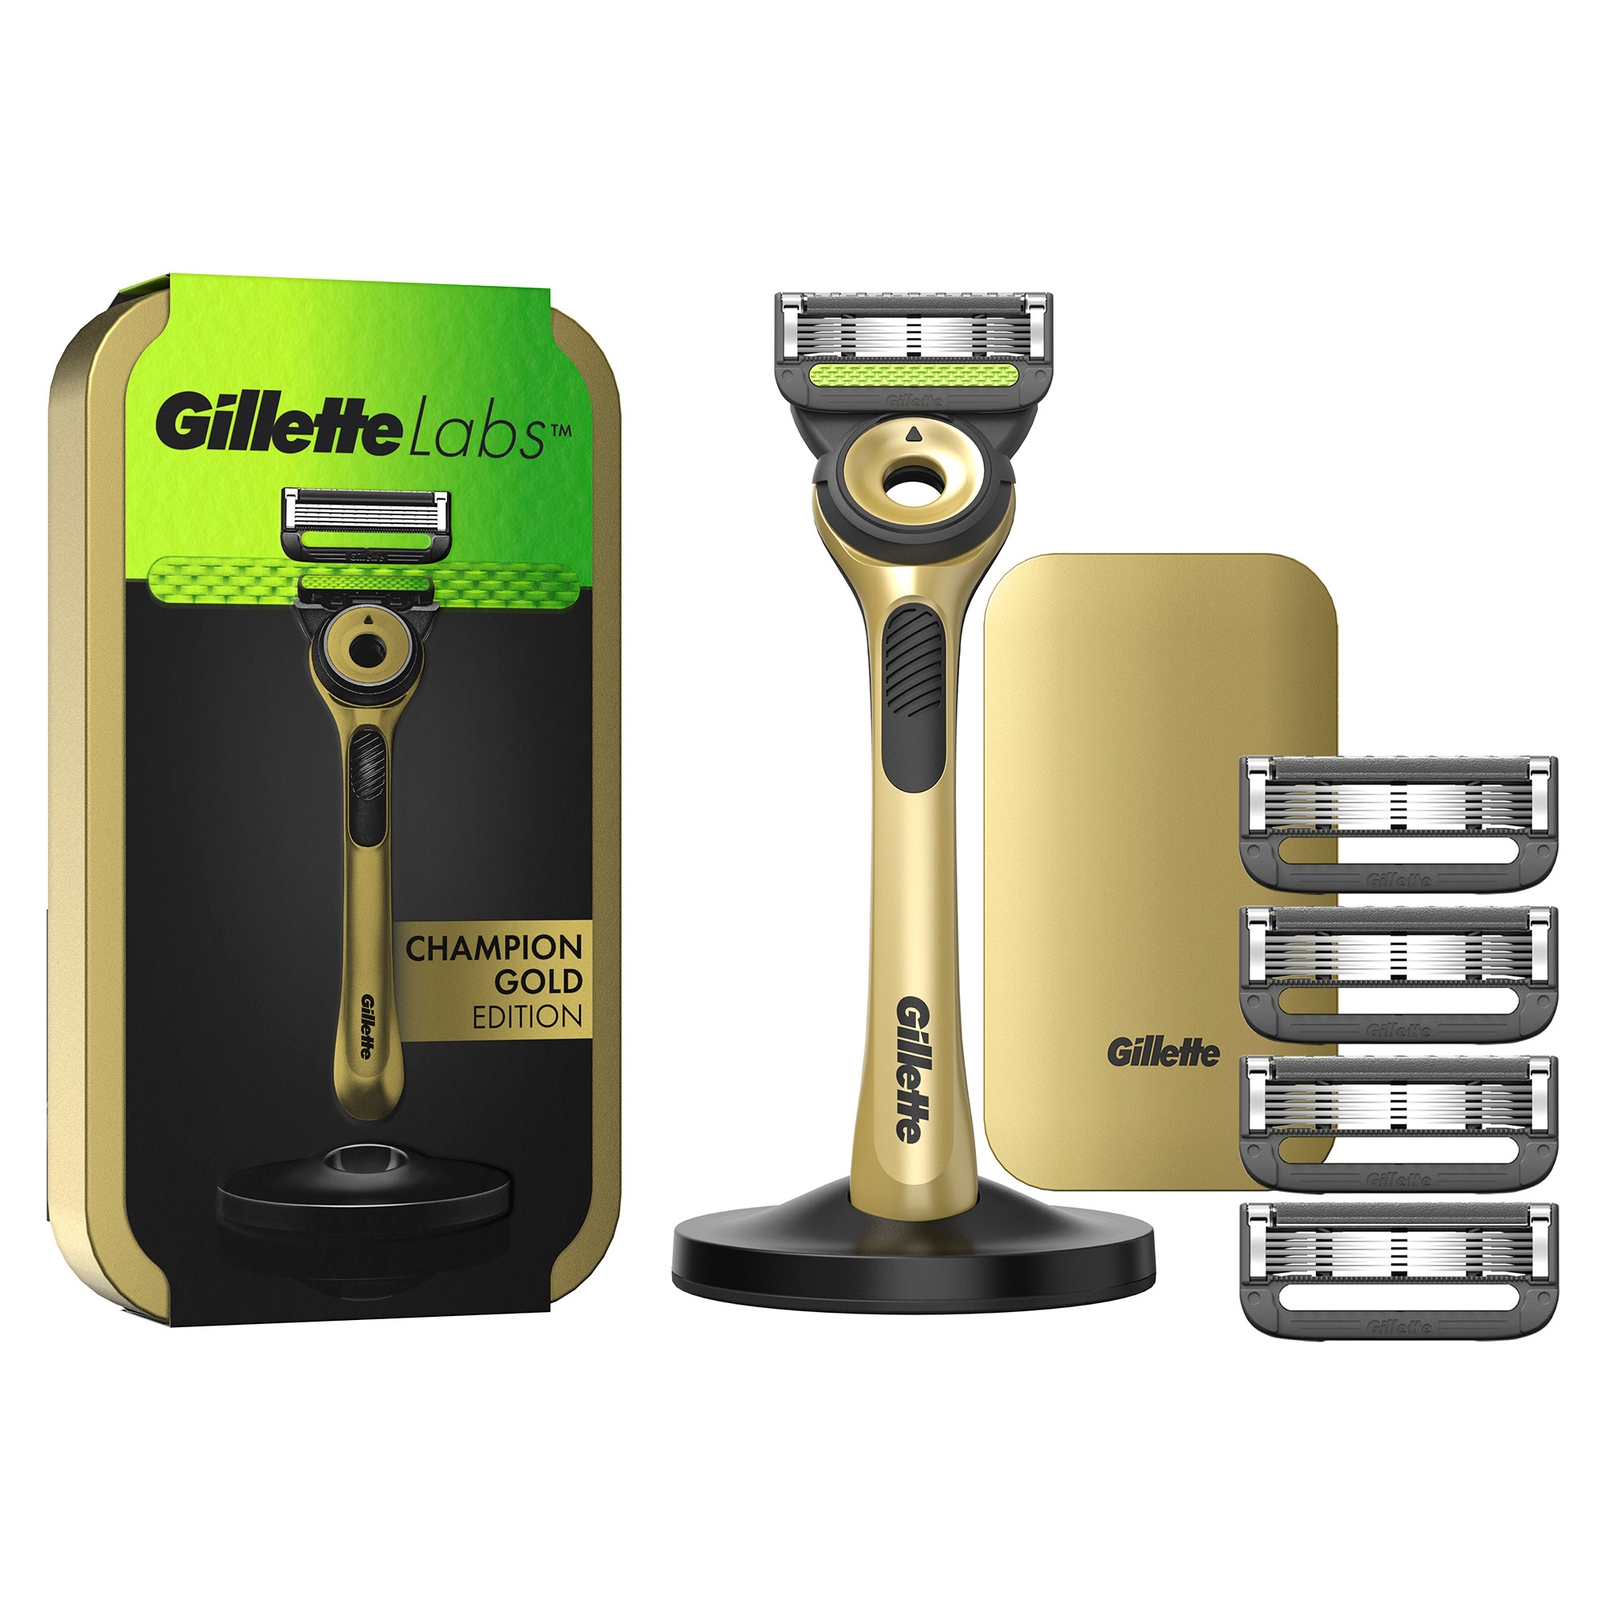 Gillette Labs Razor Champion Gold Edition with Travel Case & 4 Spare Blades